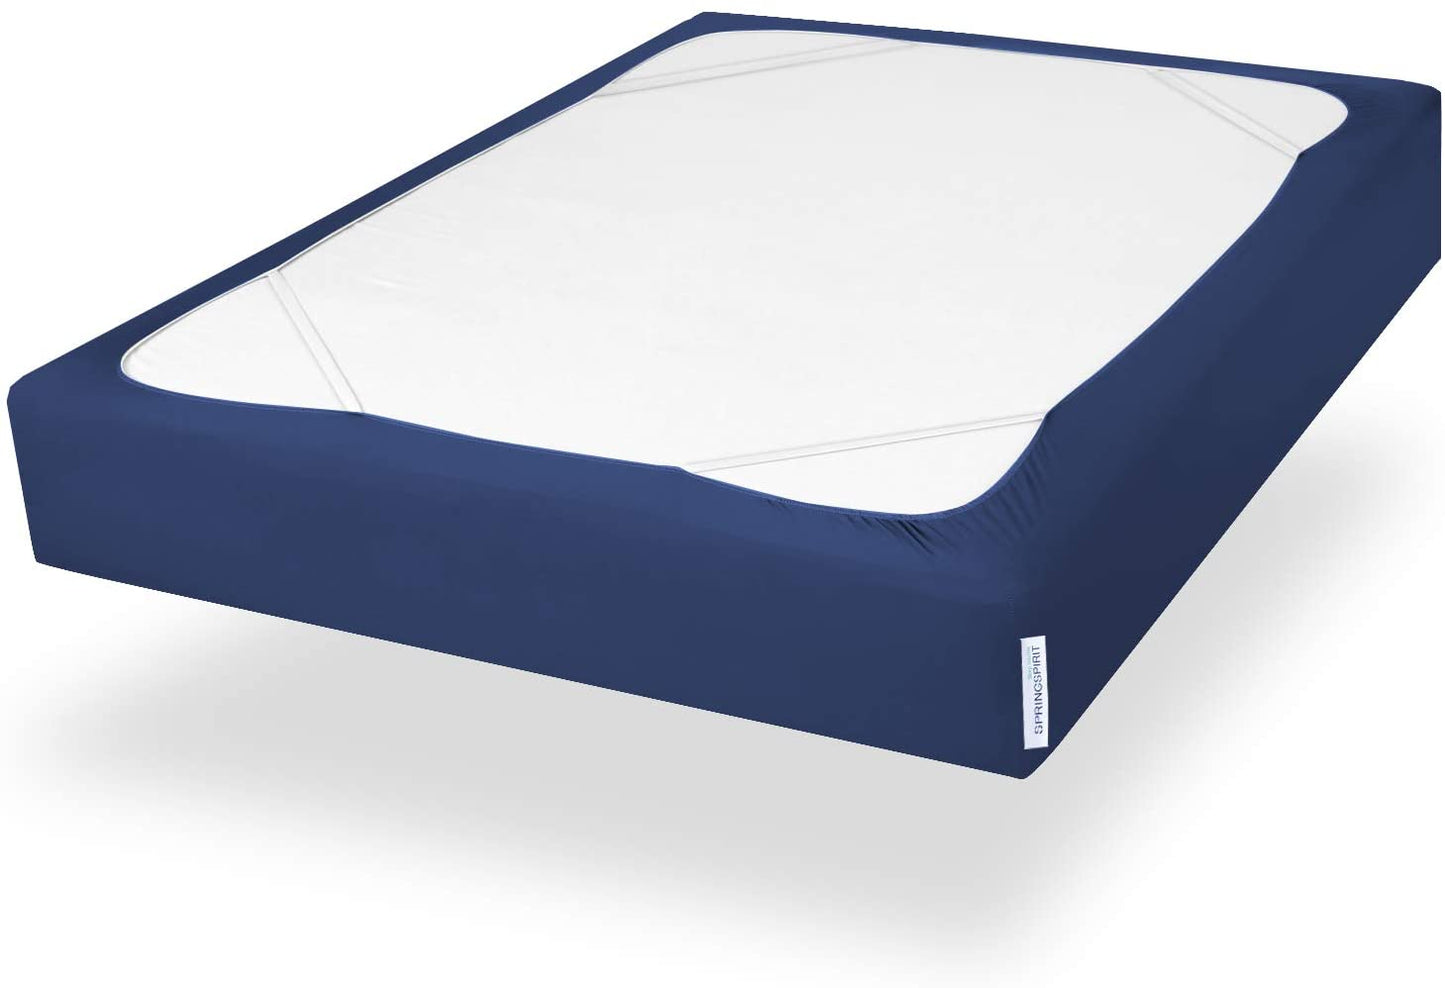 Twin Size Box Spring Cover with Smooth and Elastic Woven Material, Alternates for Bed Skirt, Wrinkle & Fading Resistant, Washable, Dustproof, Navy - Biloban Online Store